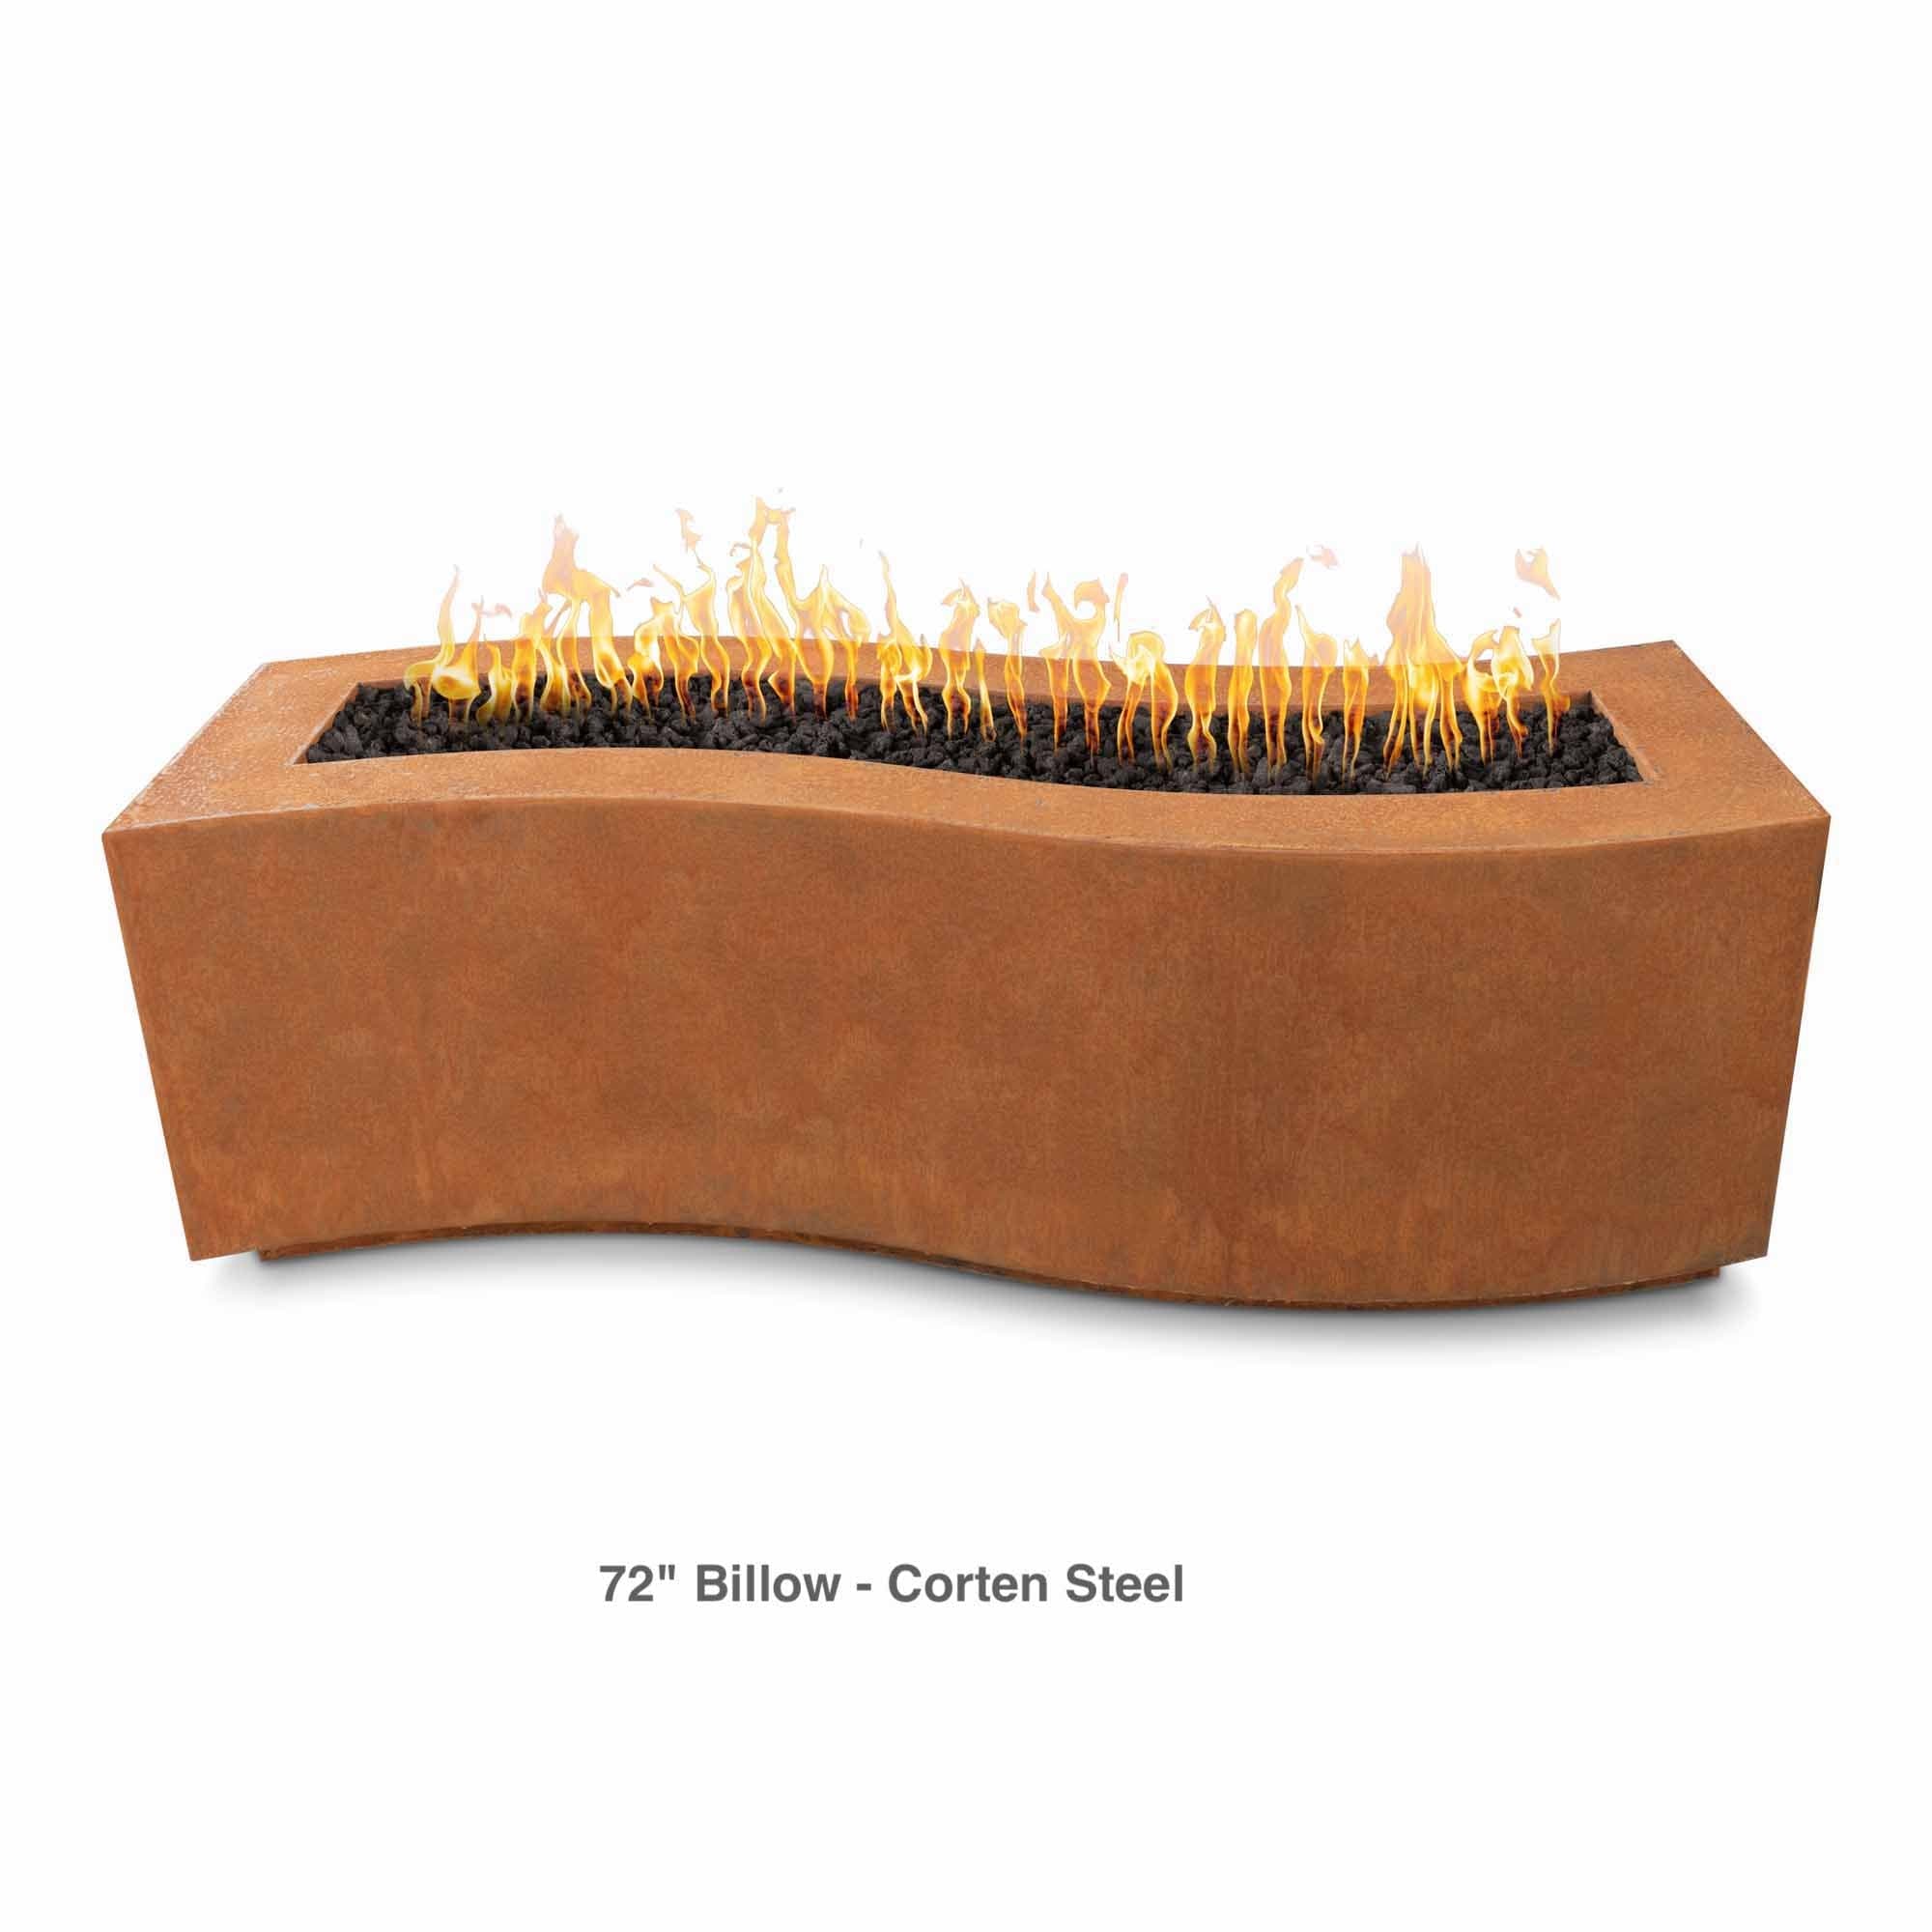 The Outdoor Plus Fire Features The Outdoor Plus 72" Rectangular Billow Fire Pit - Copper or Steel / OPT-BLWCPR70, OPT-BLWCS70, OPT-BLWSS70